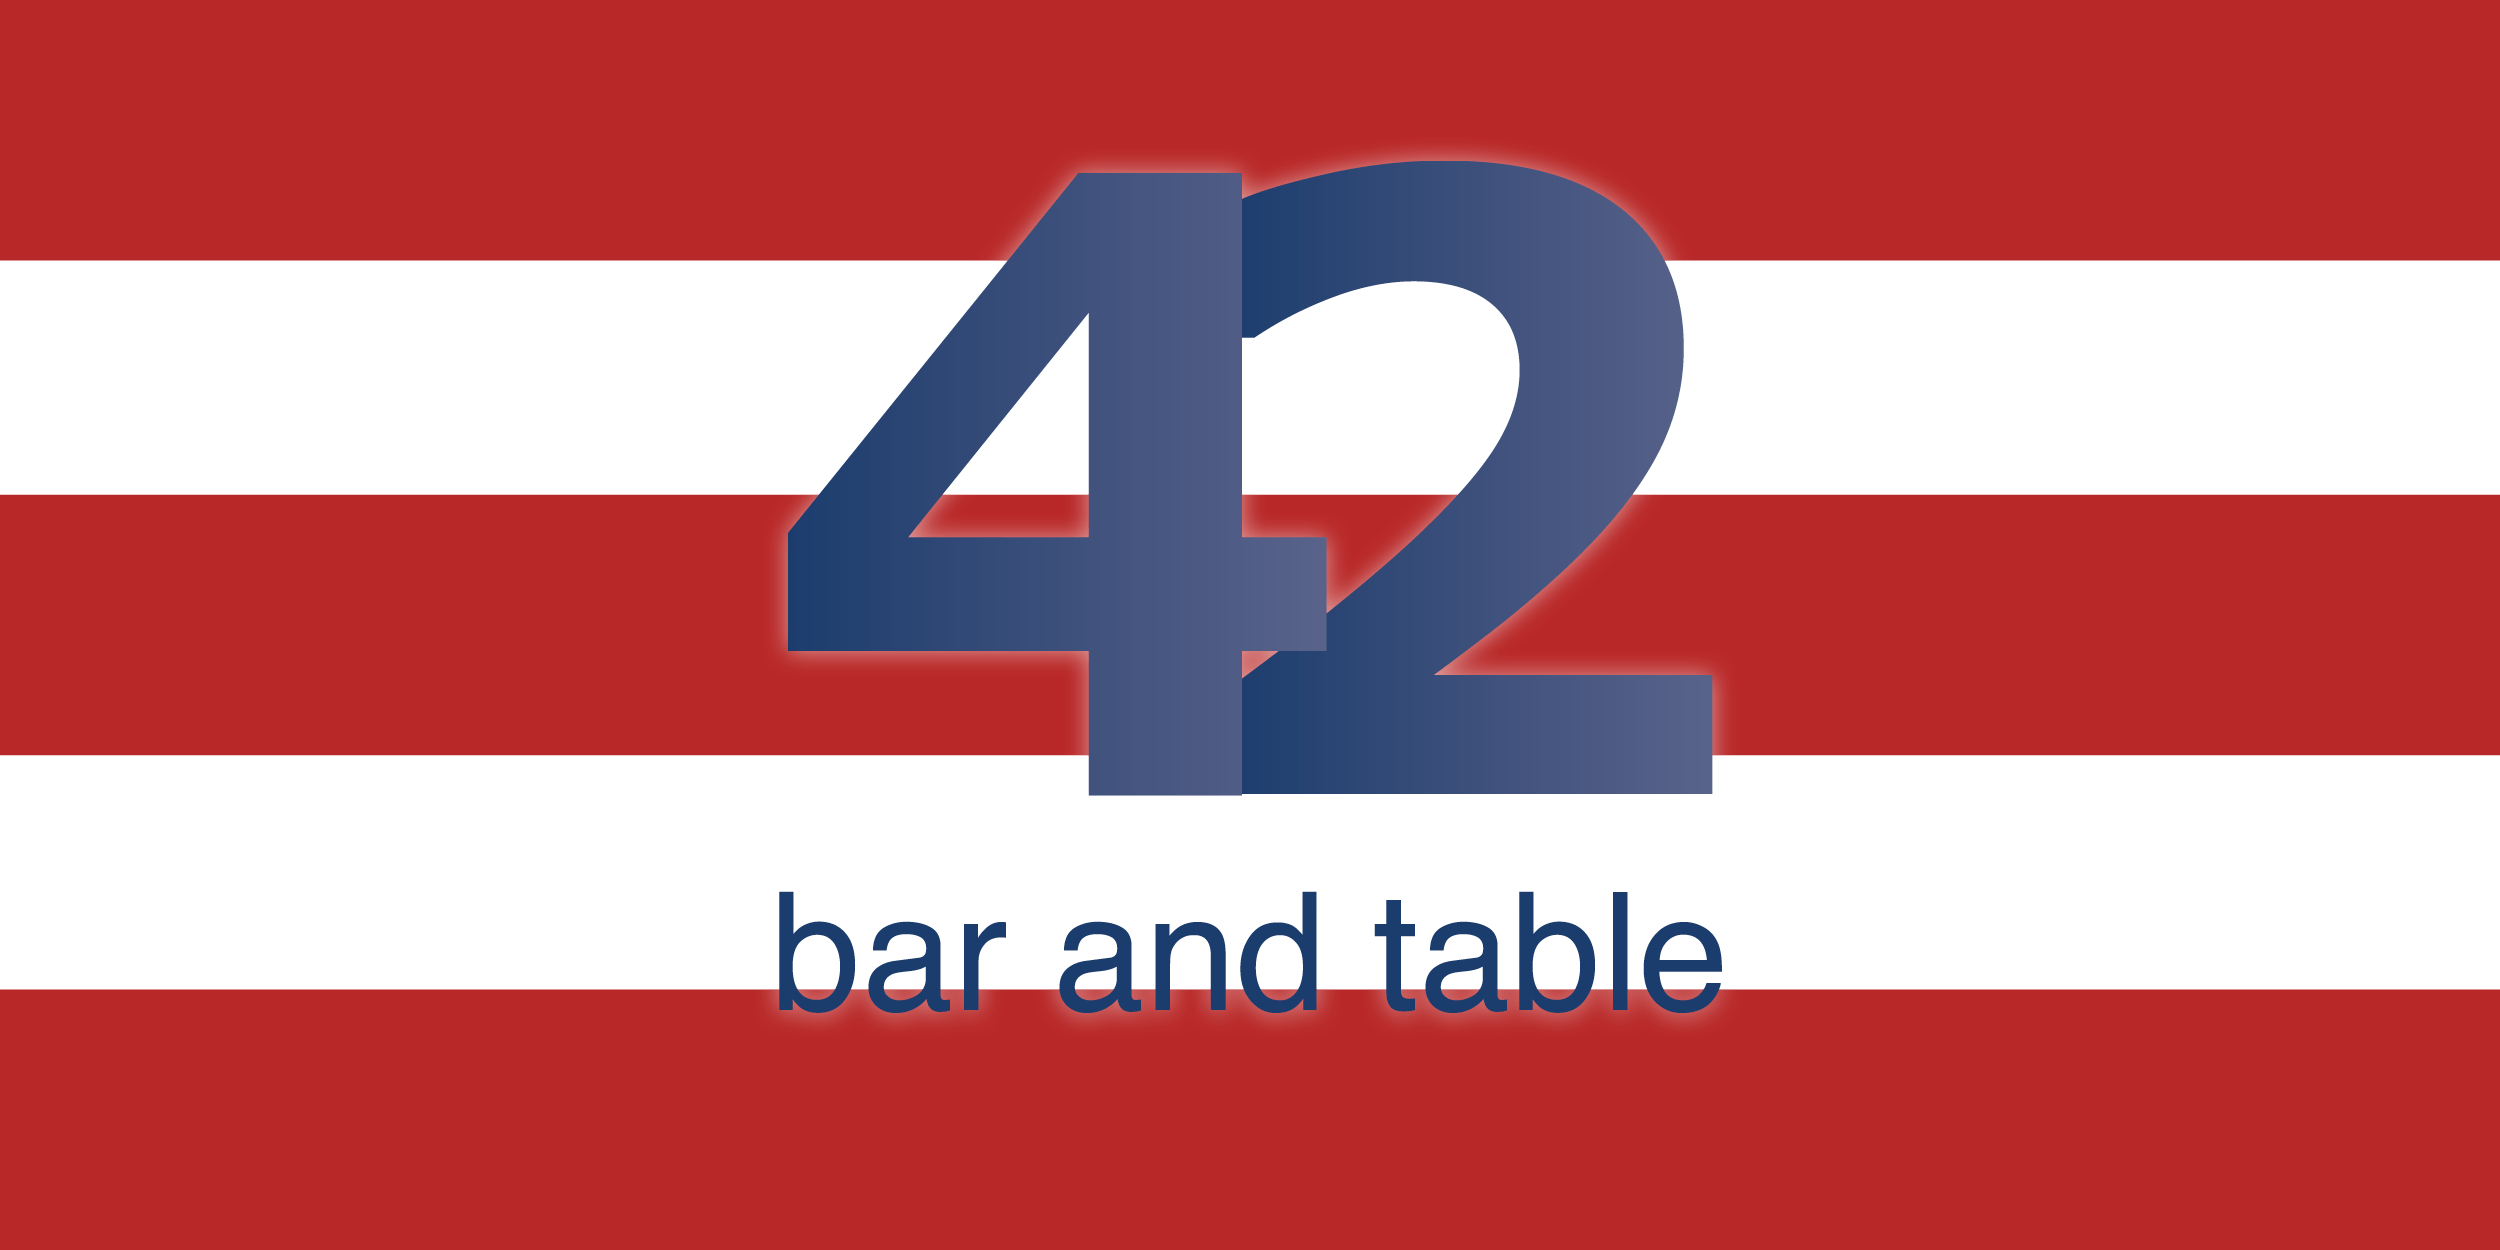 42 Bar and Table